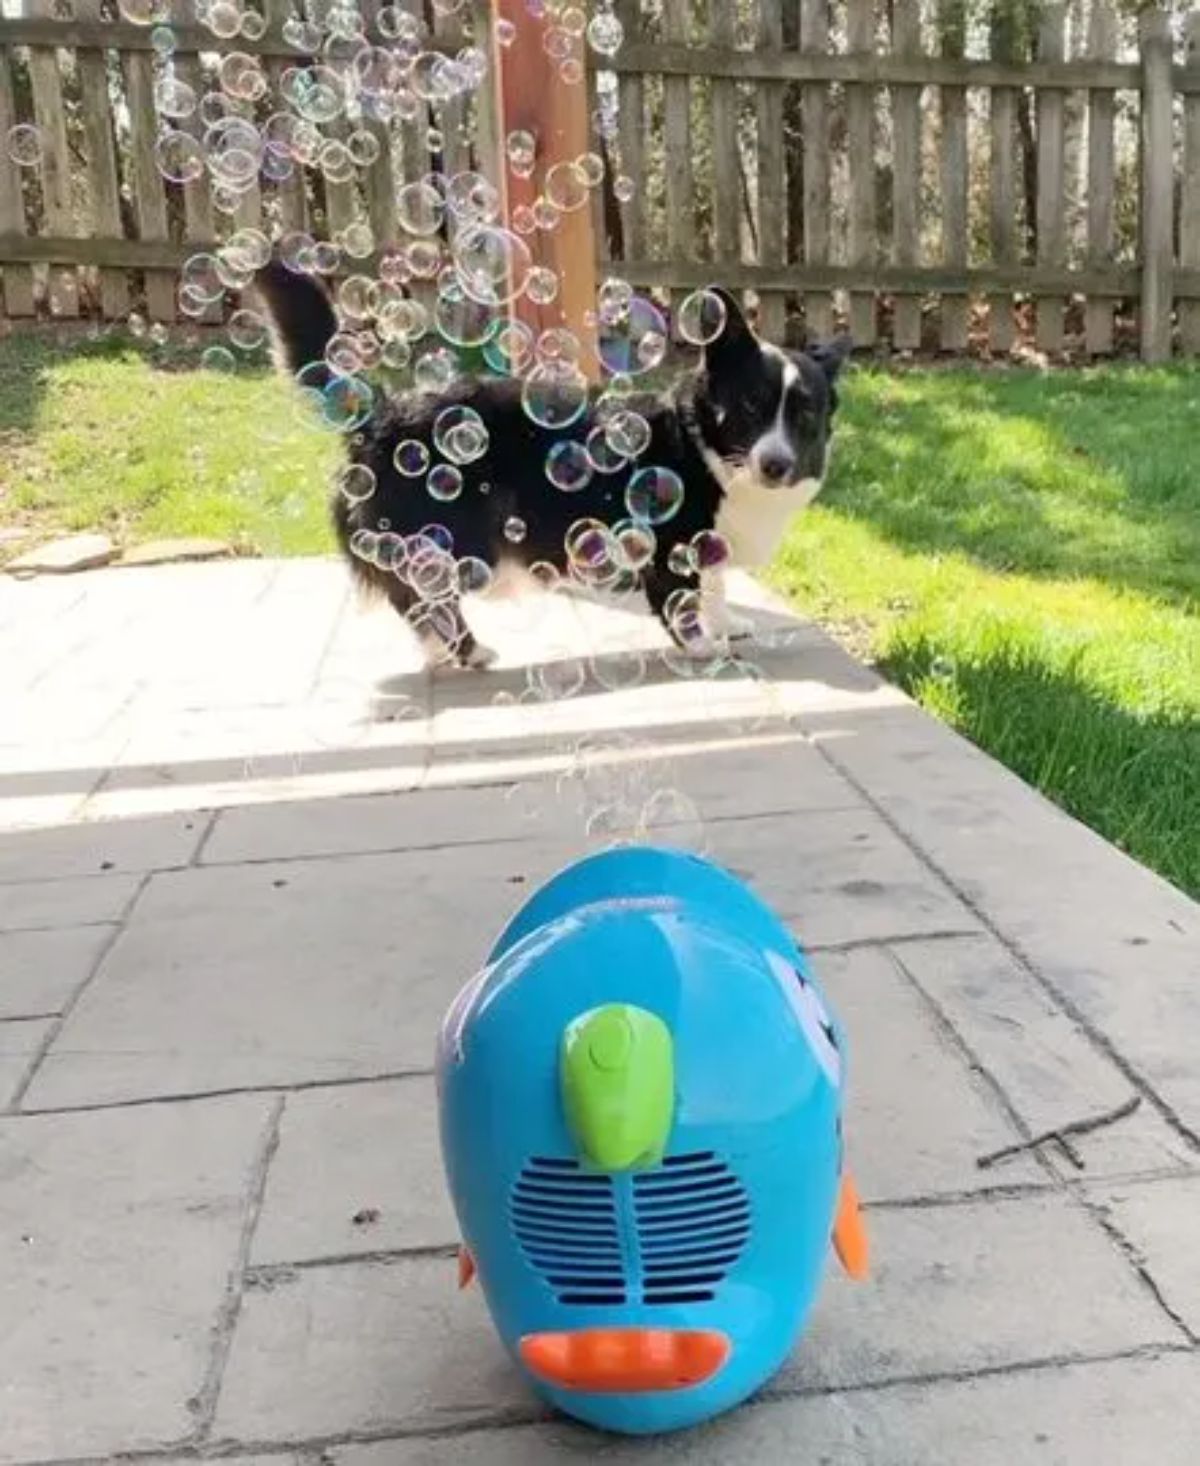 black and white corgi surrounded by soap bubbles from a machine